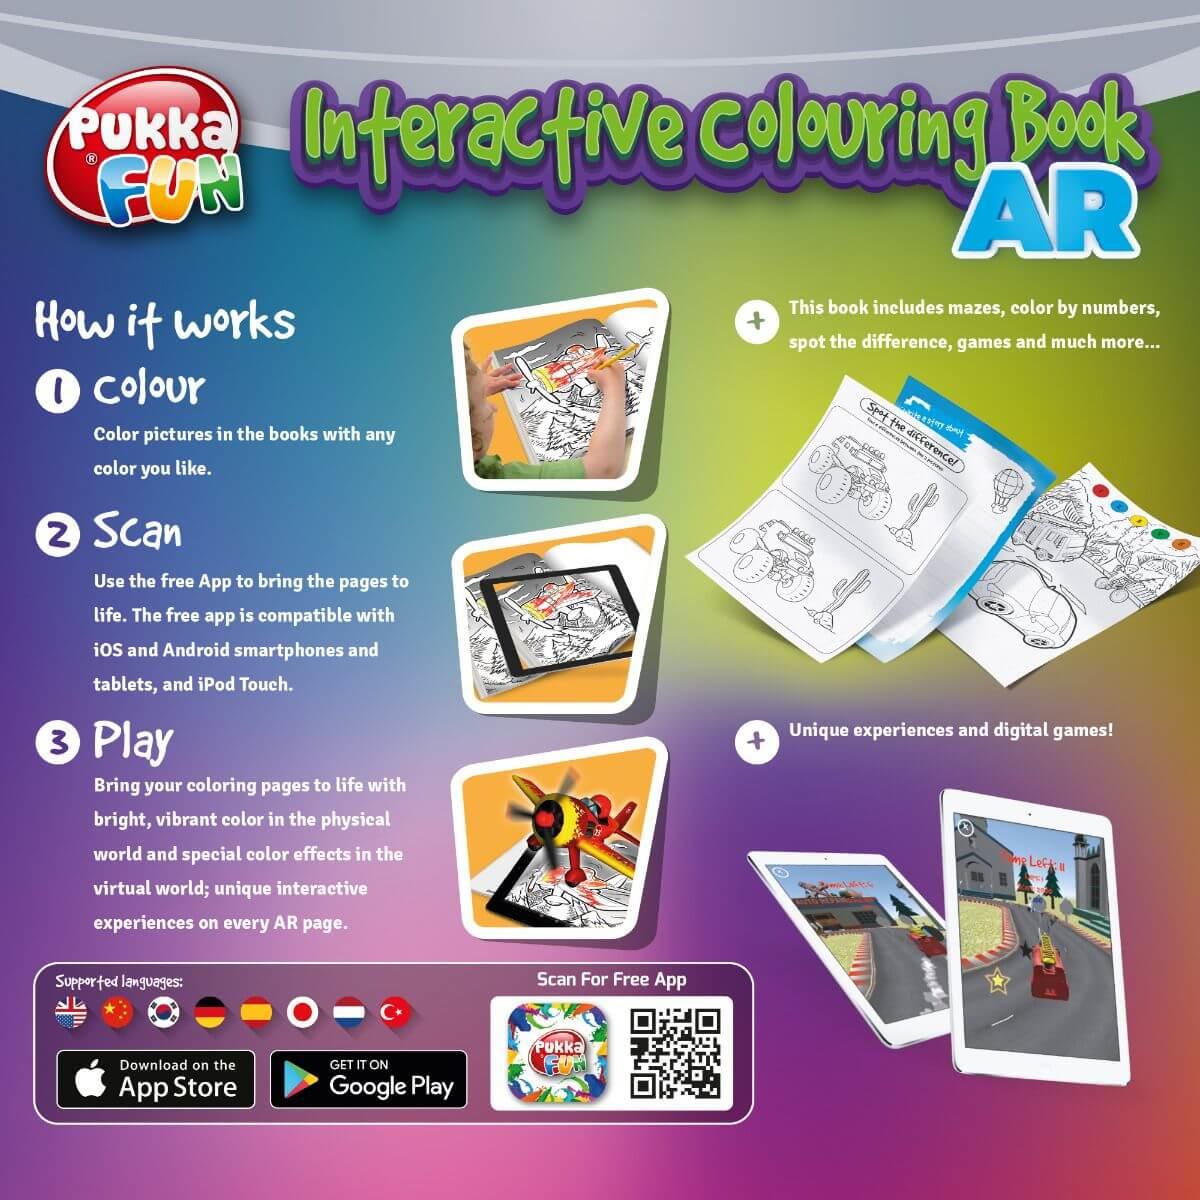 Rear of the colouring pad illustrating how it works with an ipad or tablet.